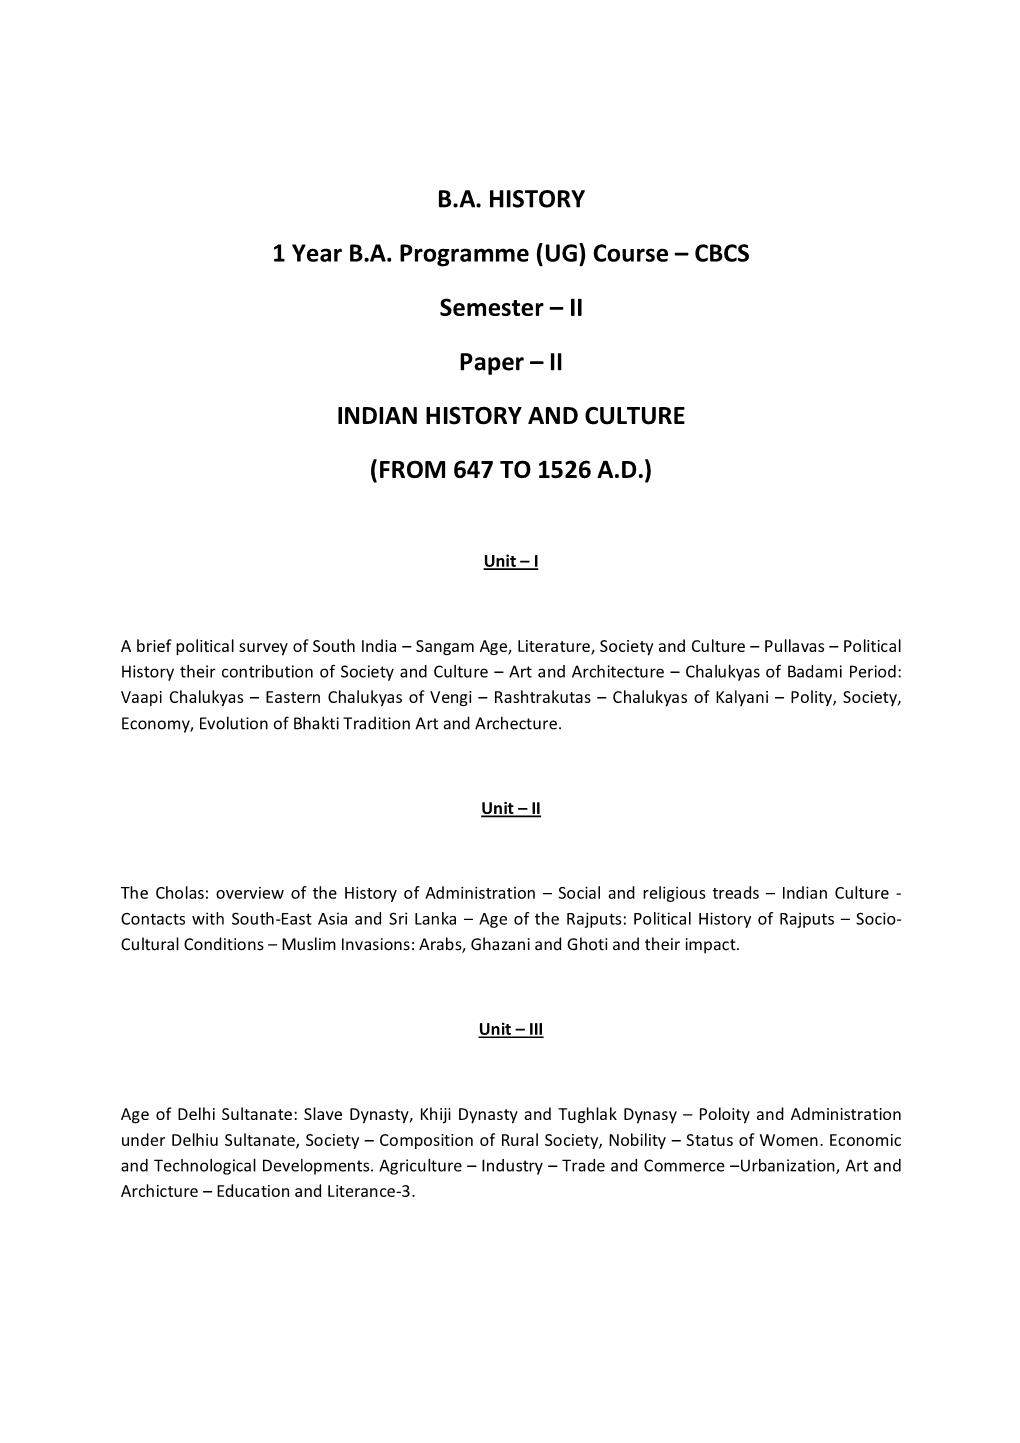 Ii Indian History and Culture